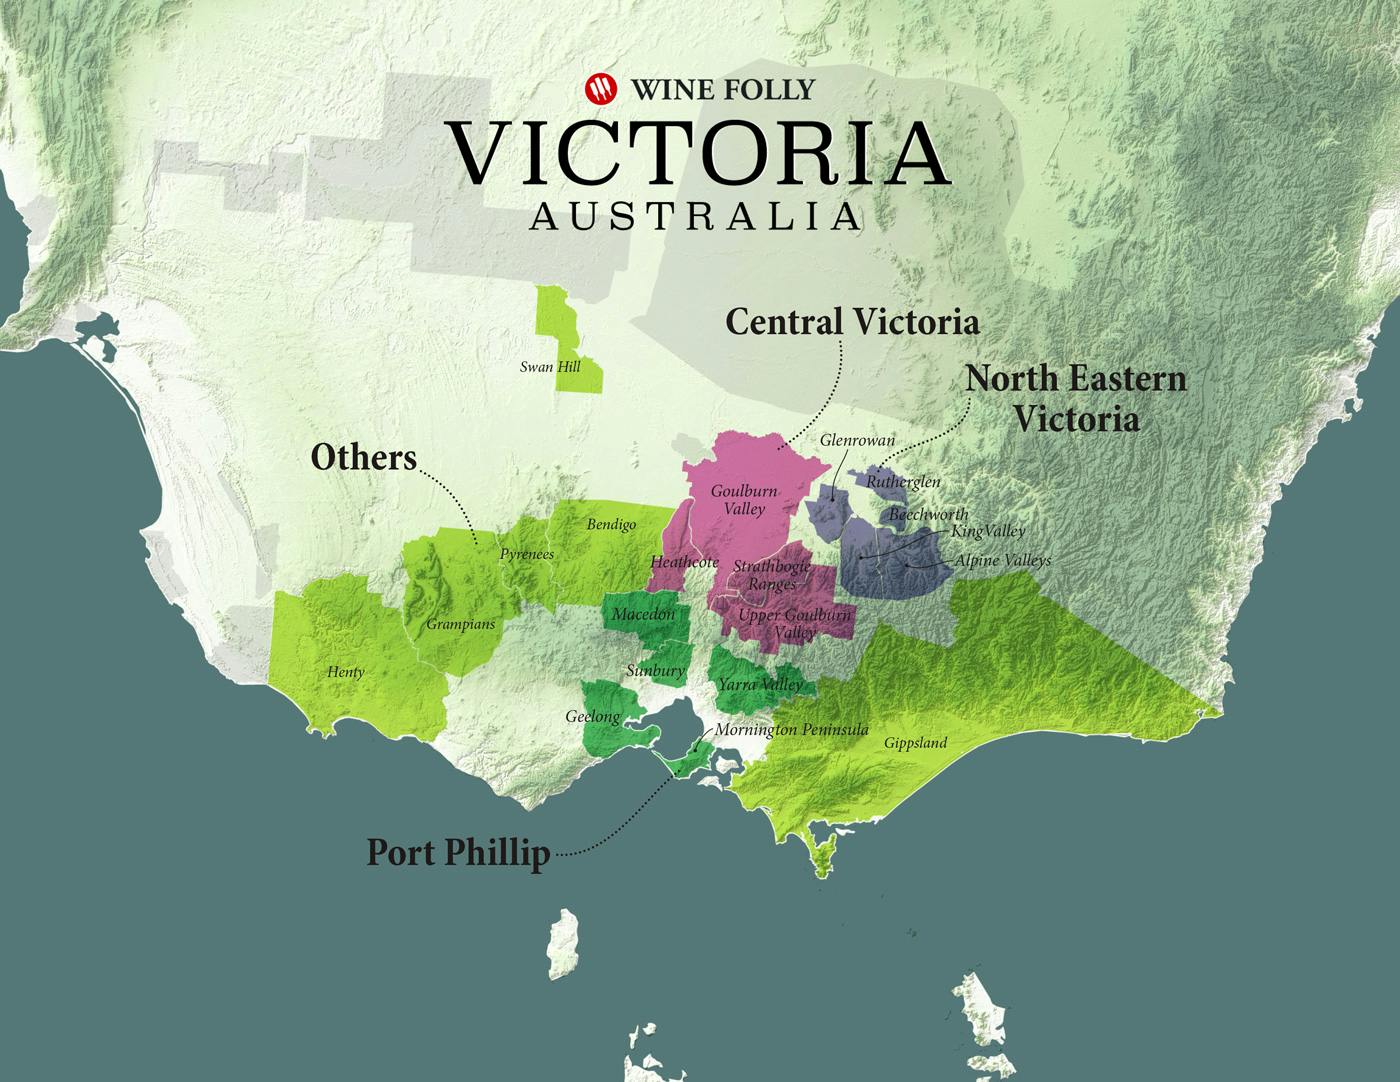 Cover Image for Yarra Valley and The Wines of Victoria, Australia